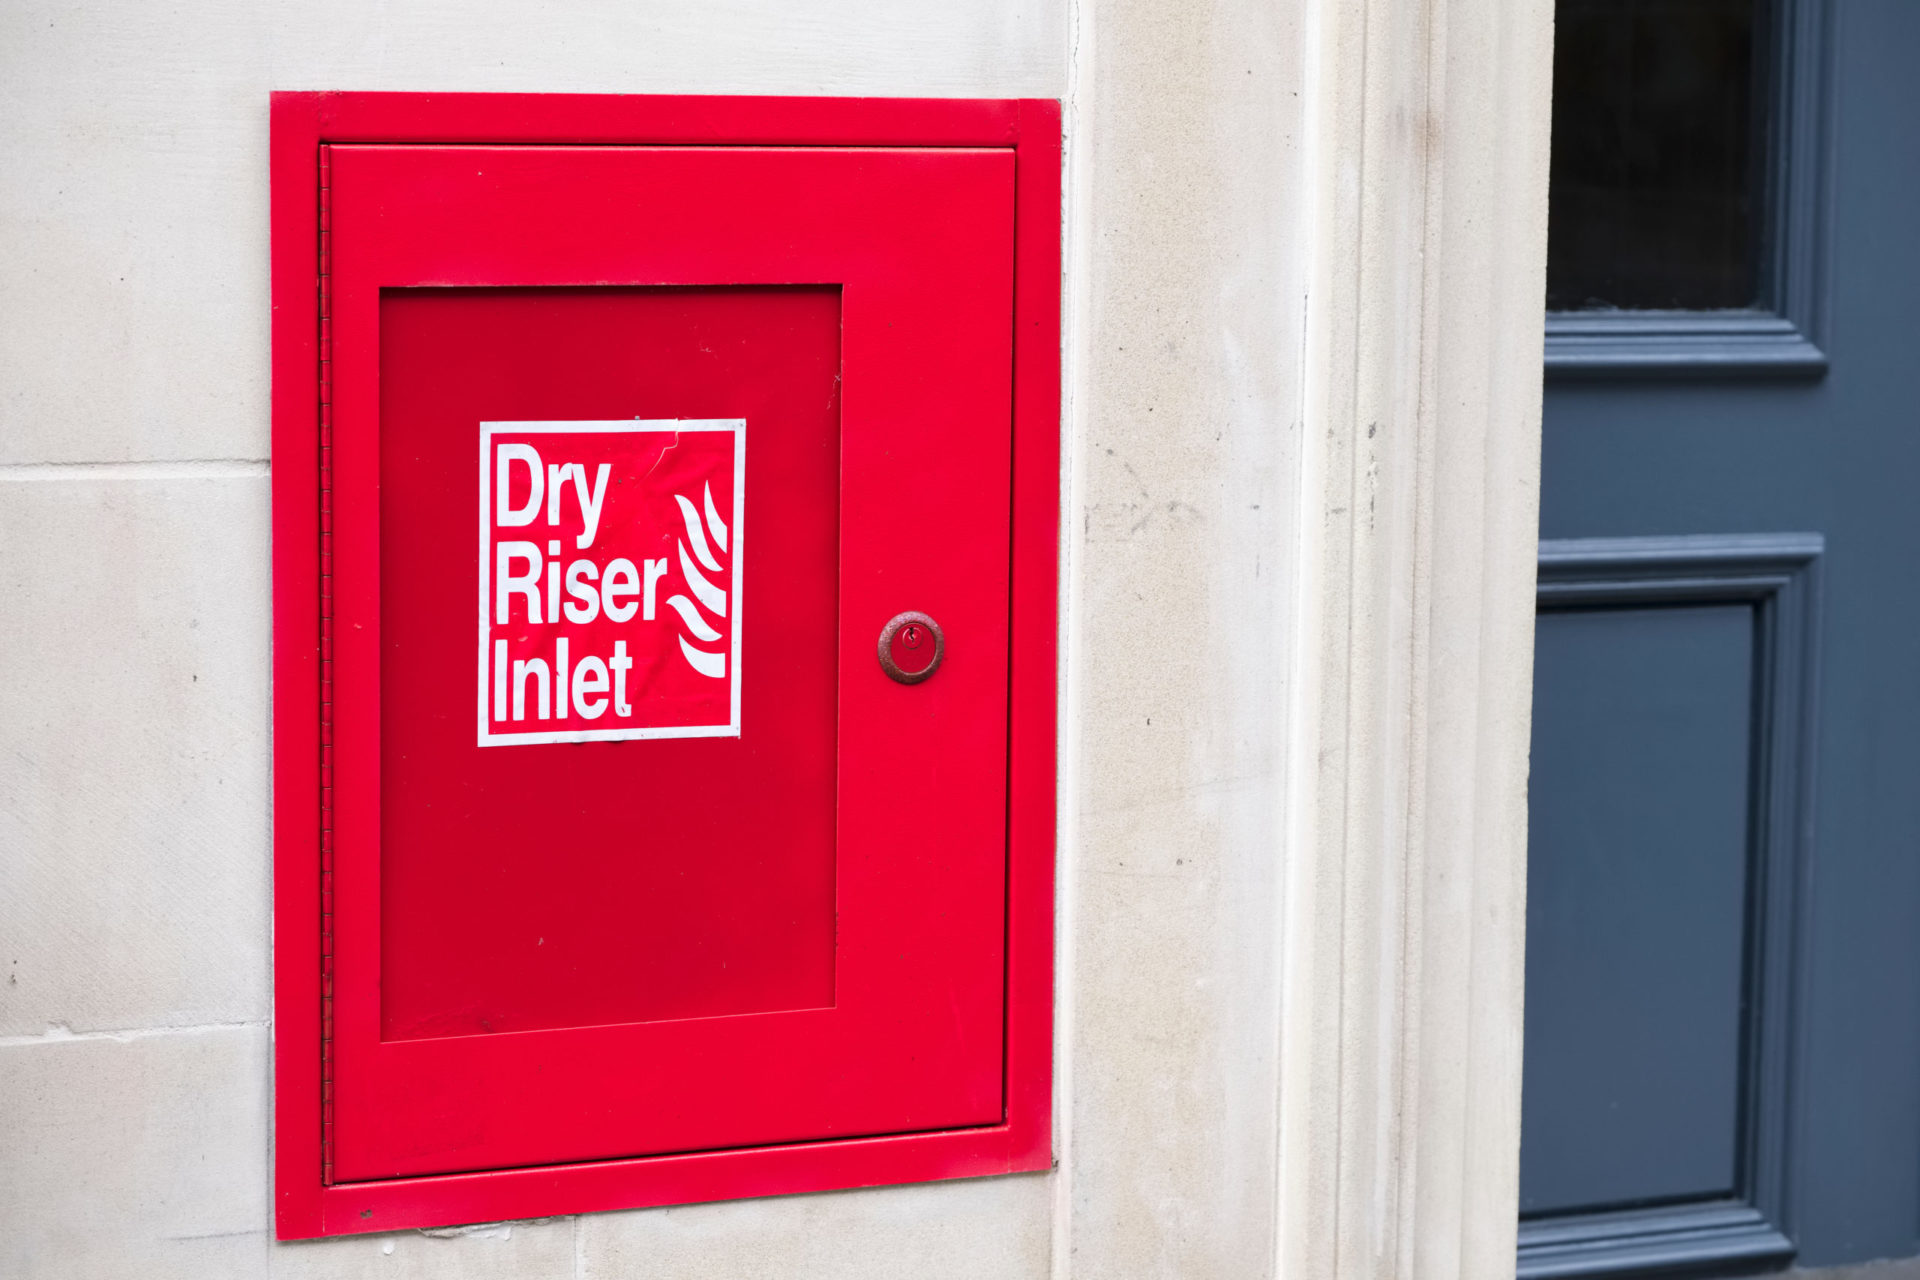 Dry riser red inlet box and sign at wall